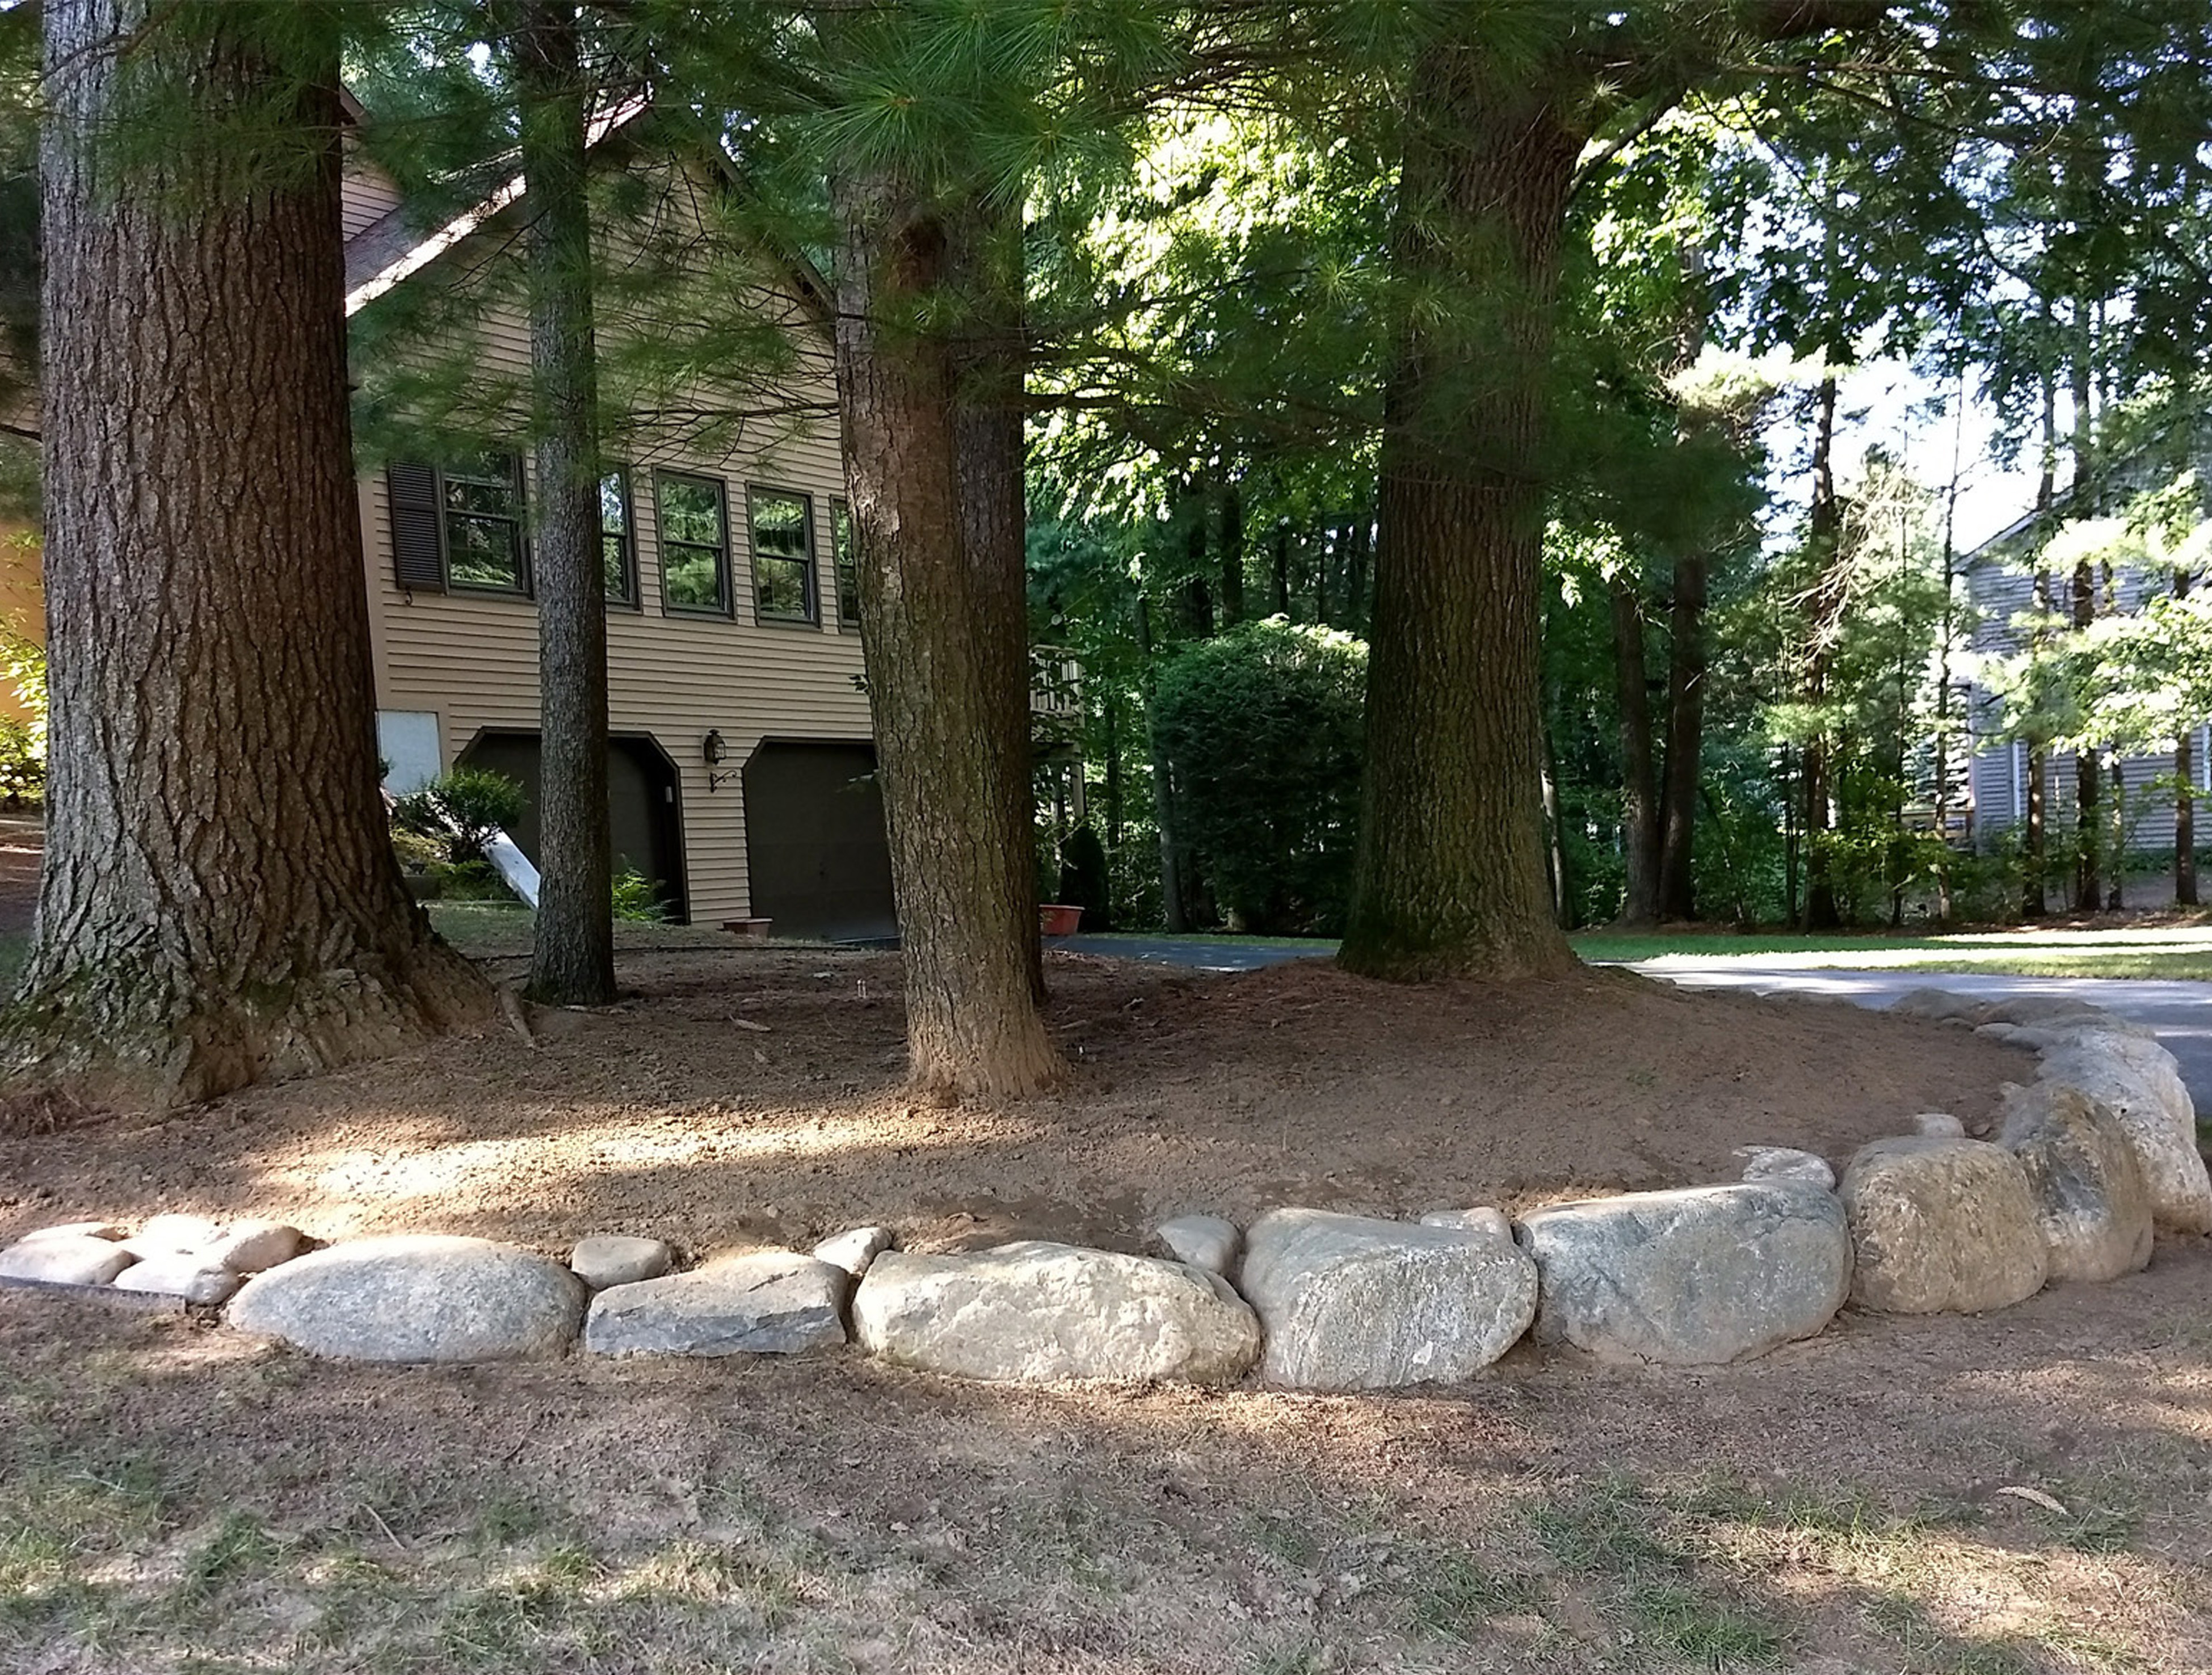 Thumbnail of the left side of the leveled area around the trees and the newly placed stone retaining wall and the house in the background